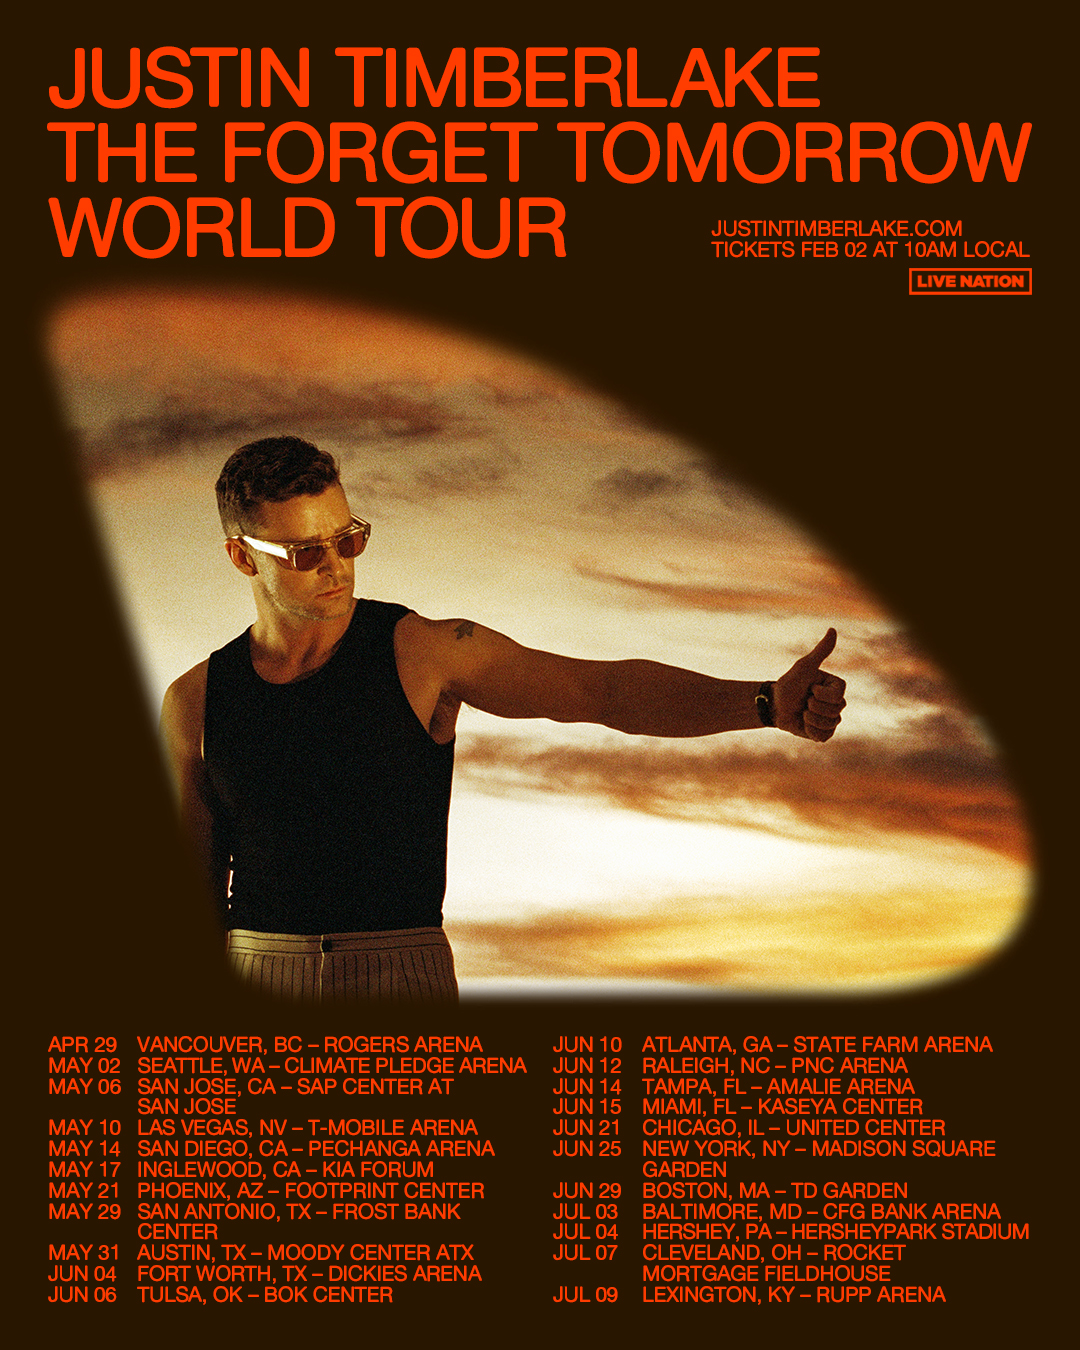 Justin Timberlake - The Forget Tomorrow World Tour al Moody Center ATX Tickets